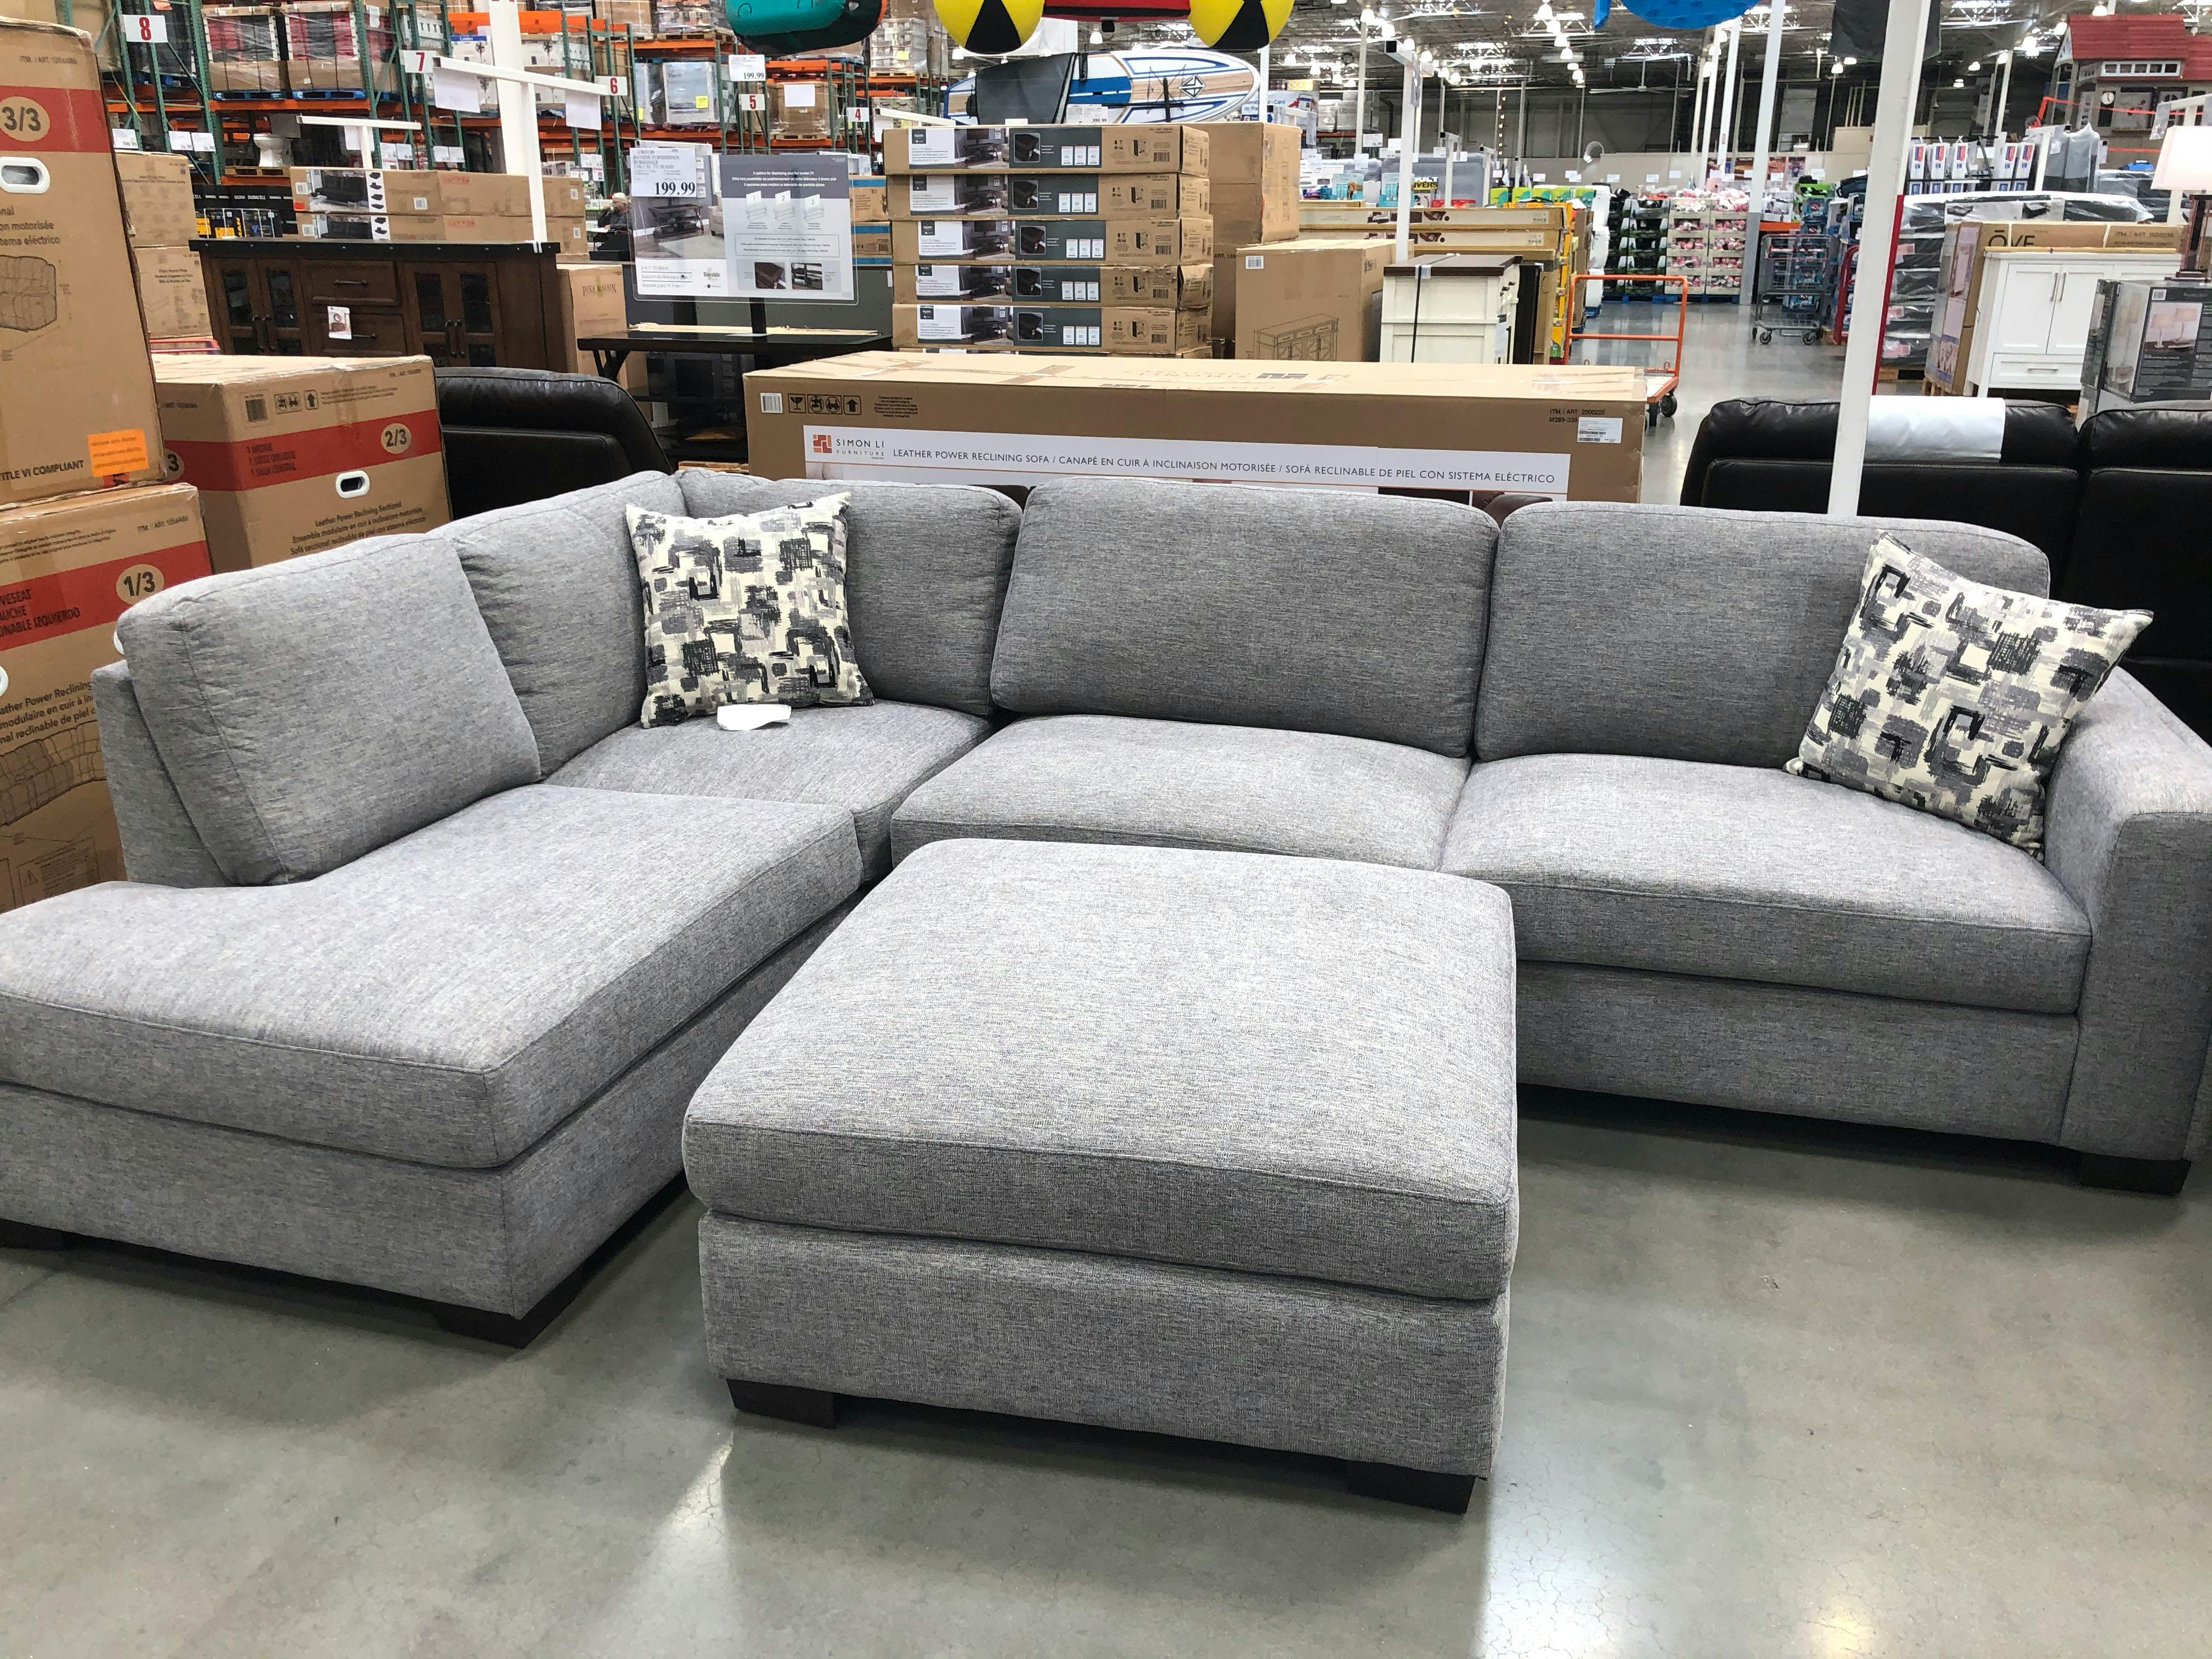 It's Furniture Month at Costco: Save on Couches, Consoles, Beds, & More